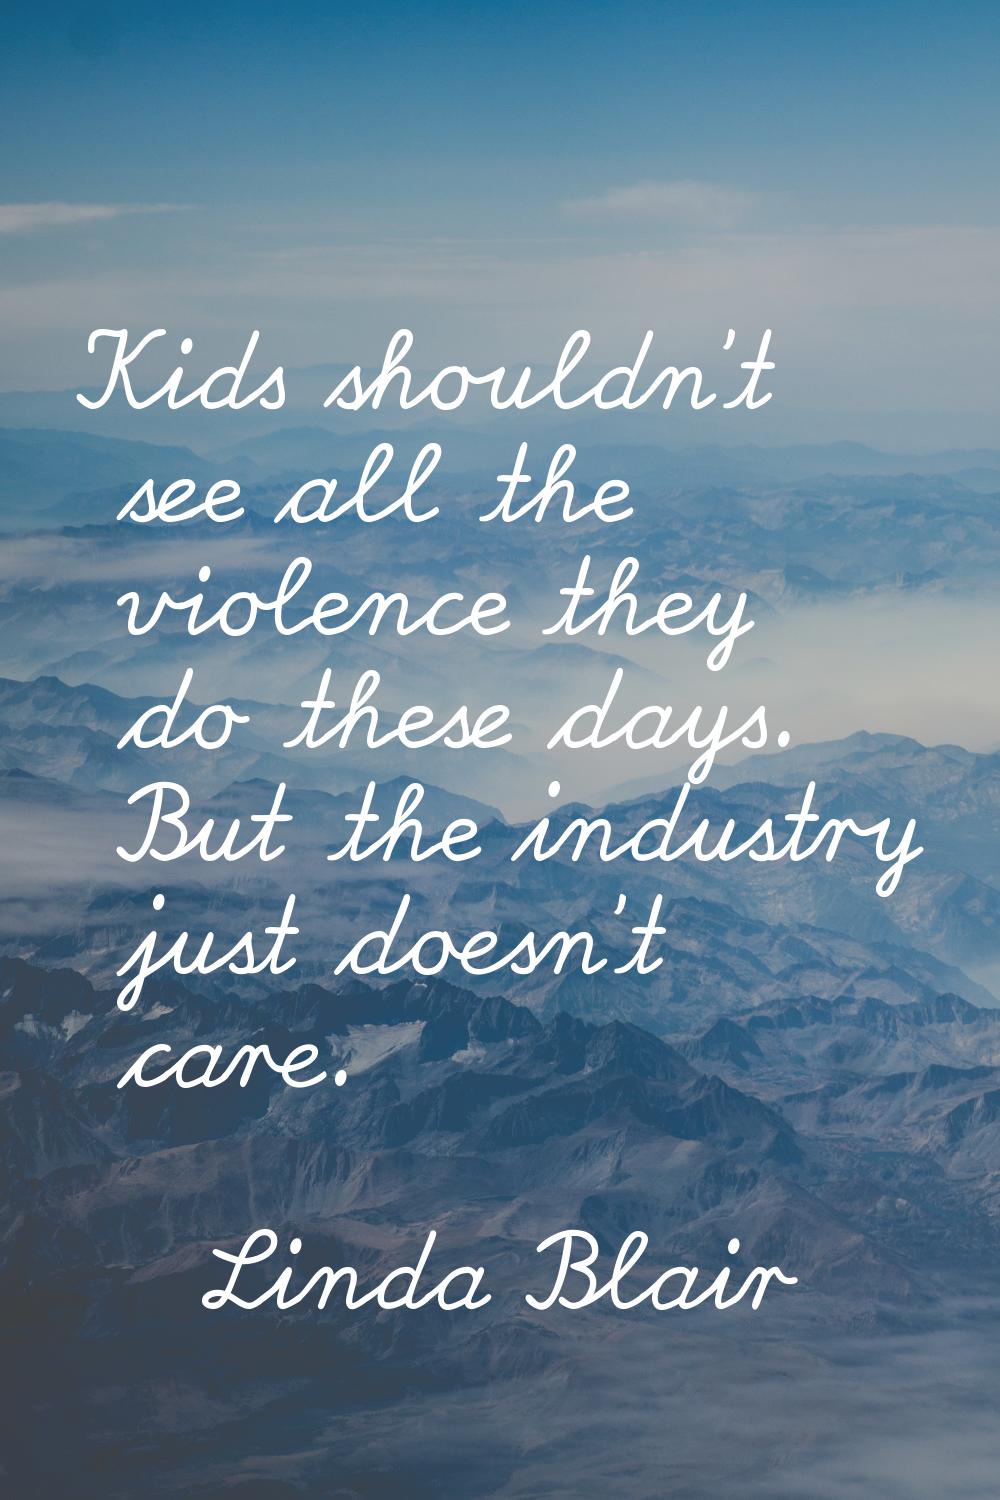 Kids shouldn't see all the violence they do these days. But the industry just doesn't care.